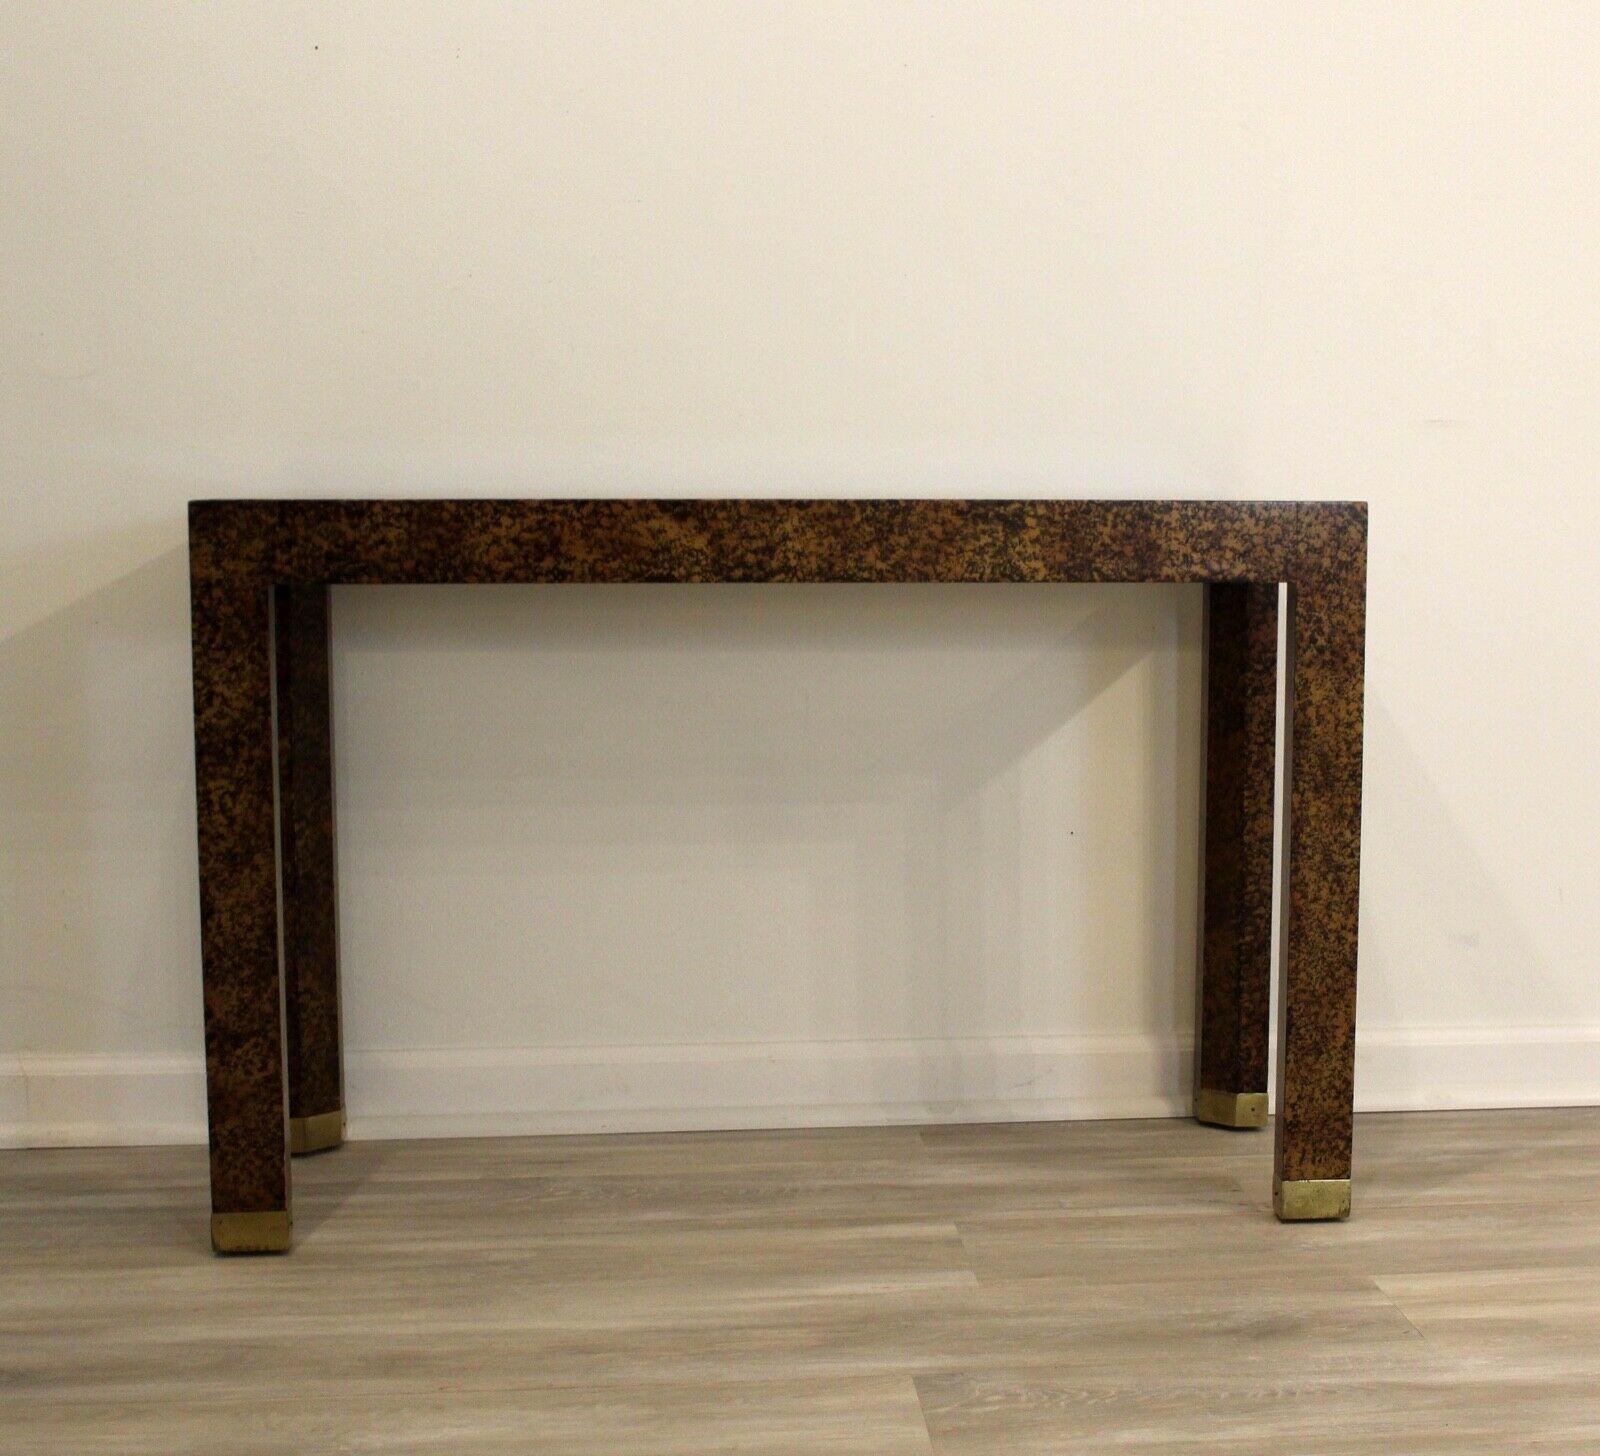 Faux tortoise shell framing creates a sophisticated, dimensional look in this Parsons style console table which is detailed with a smoked glass surface and finished with brass ferrules on each foot. This postmodern console table will work well with